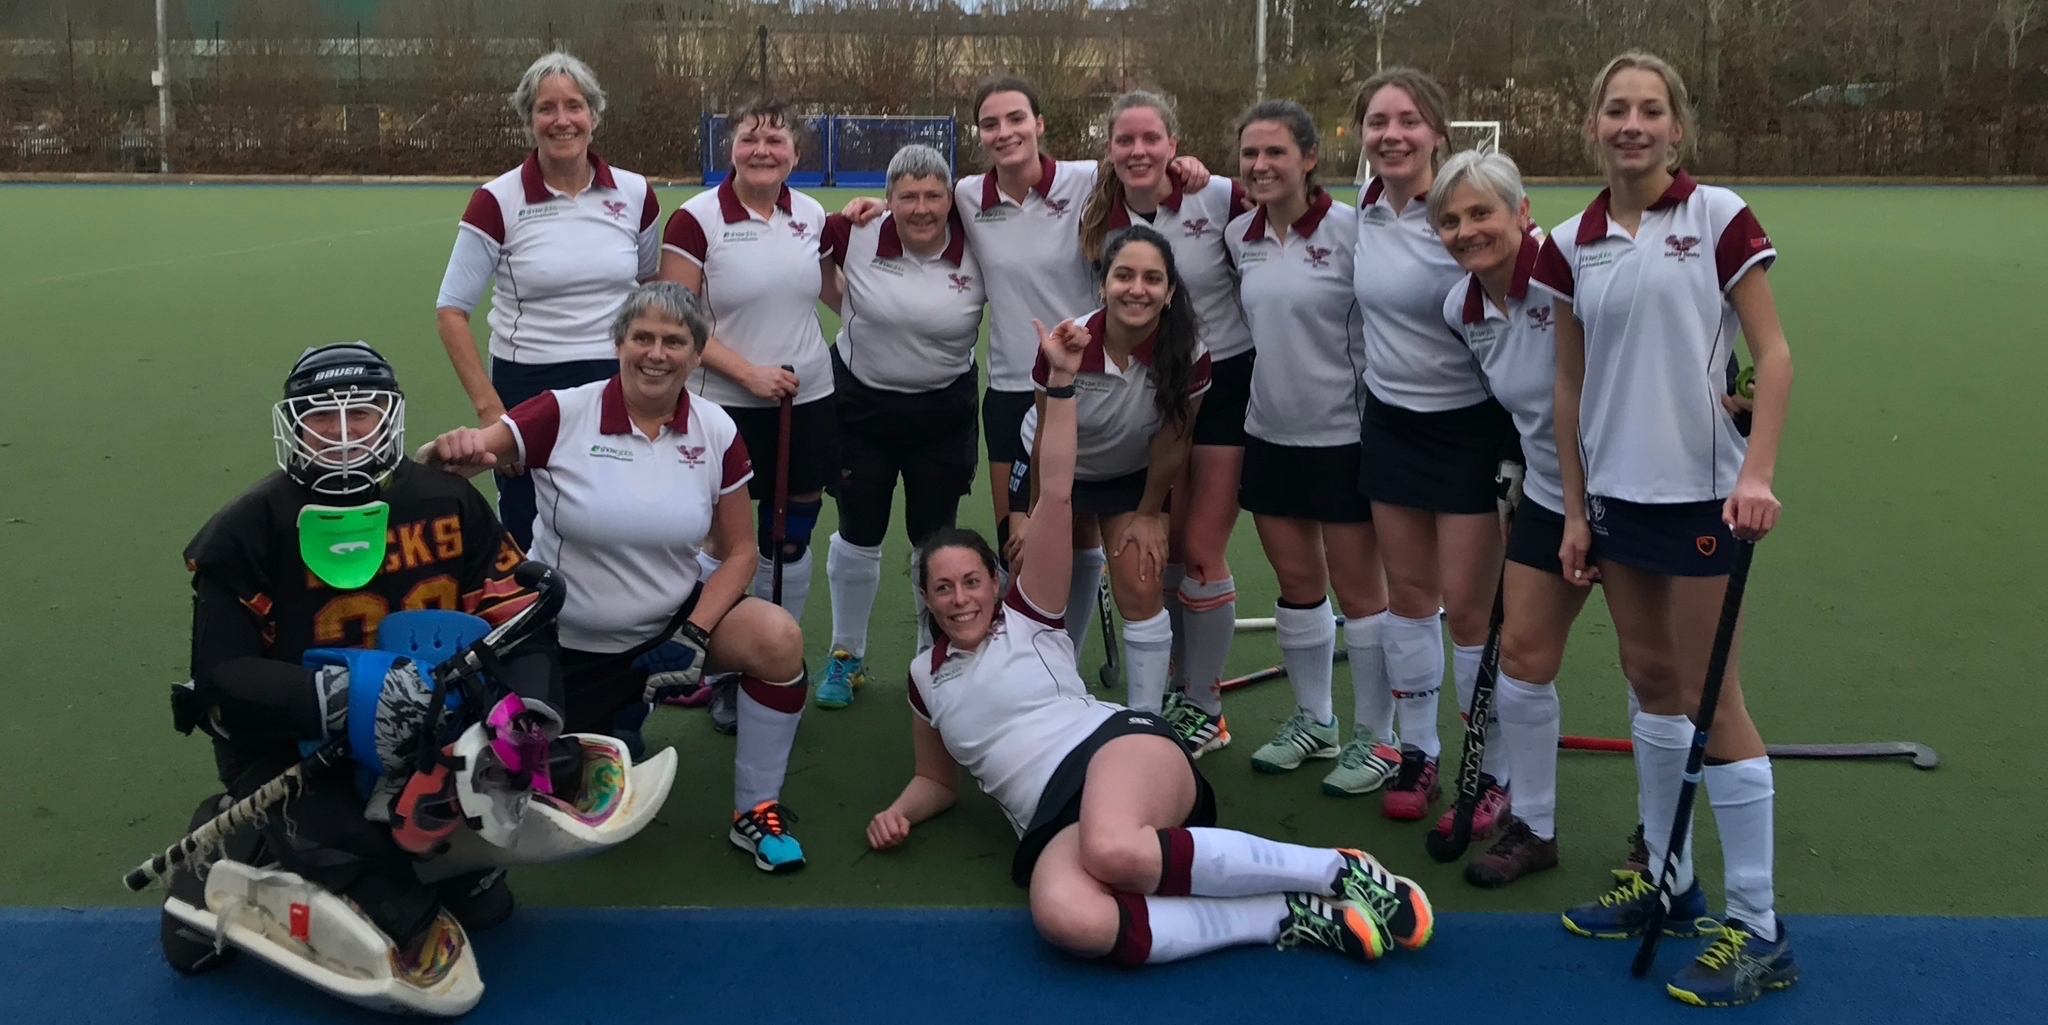 L6s come away with a 2-0 win against Oxfo...